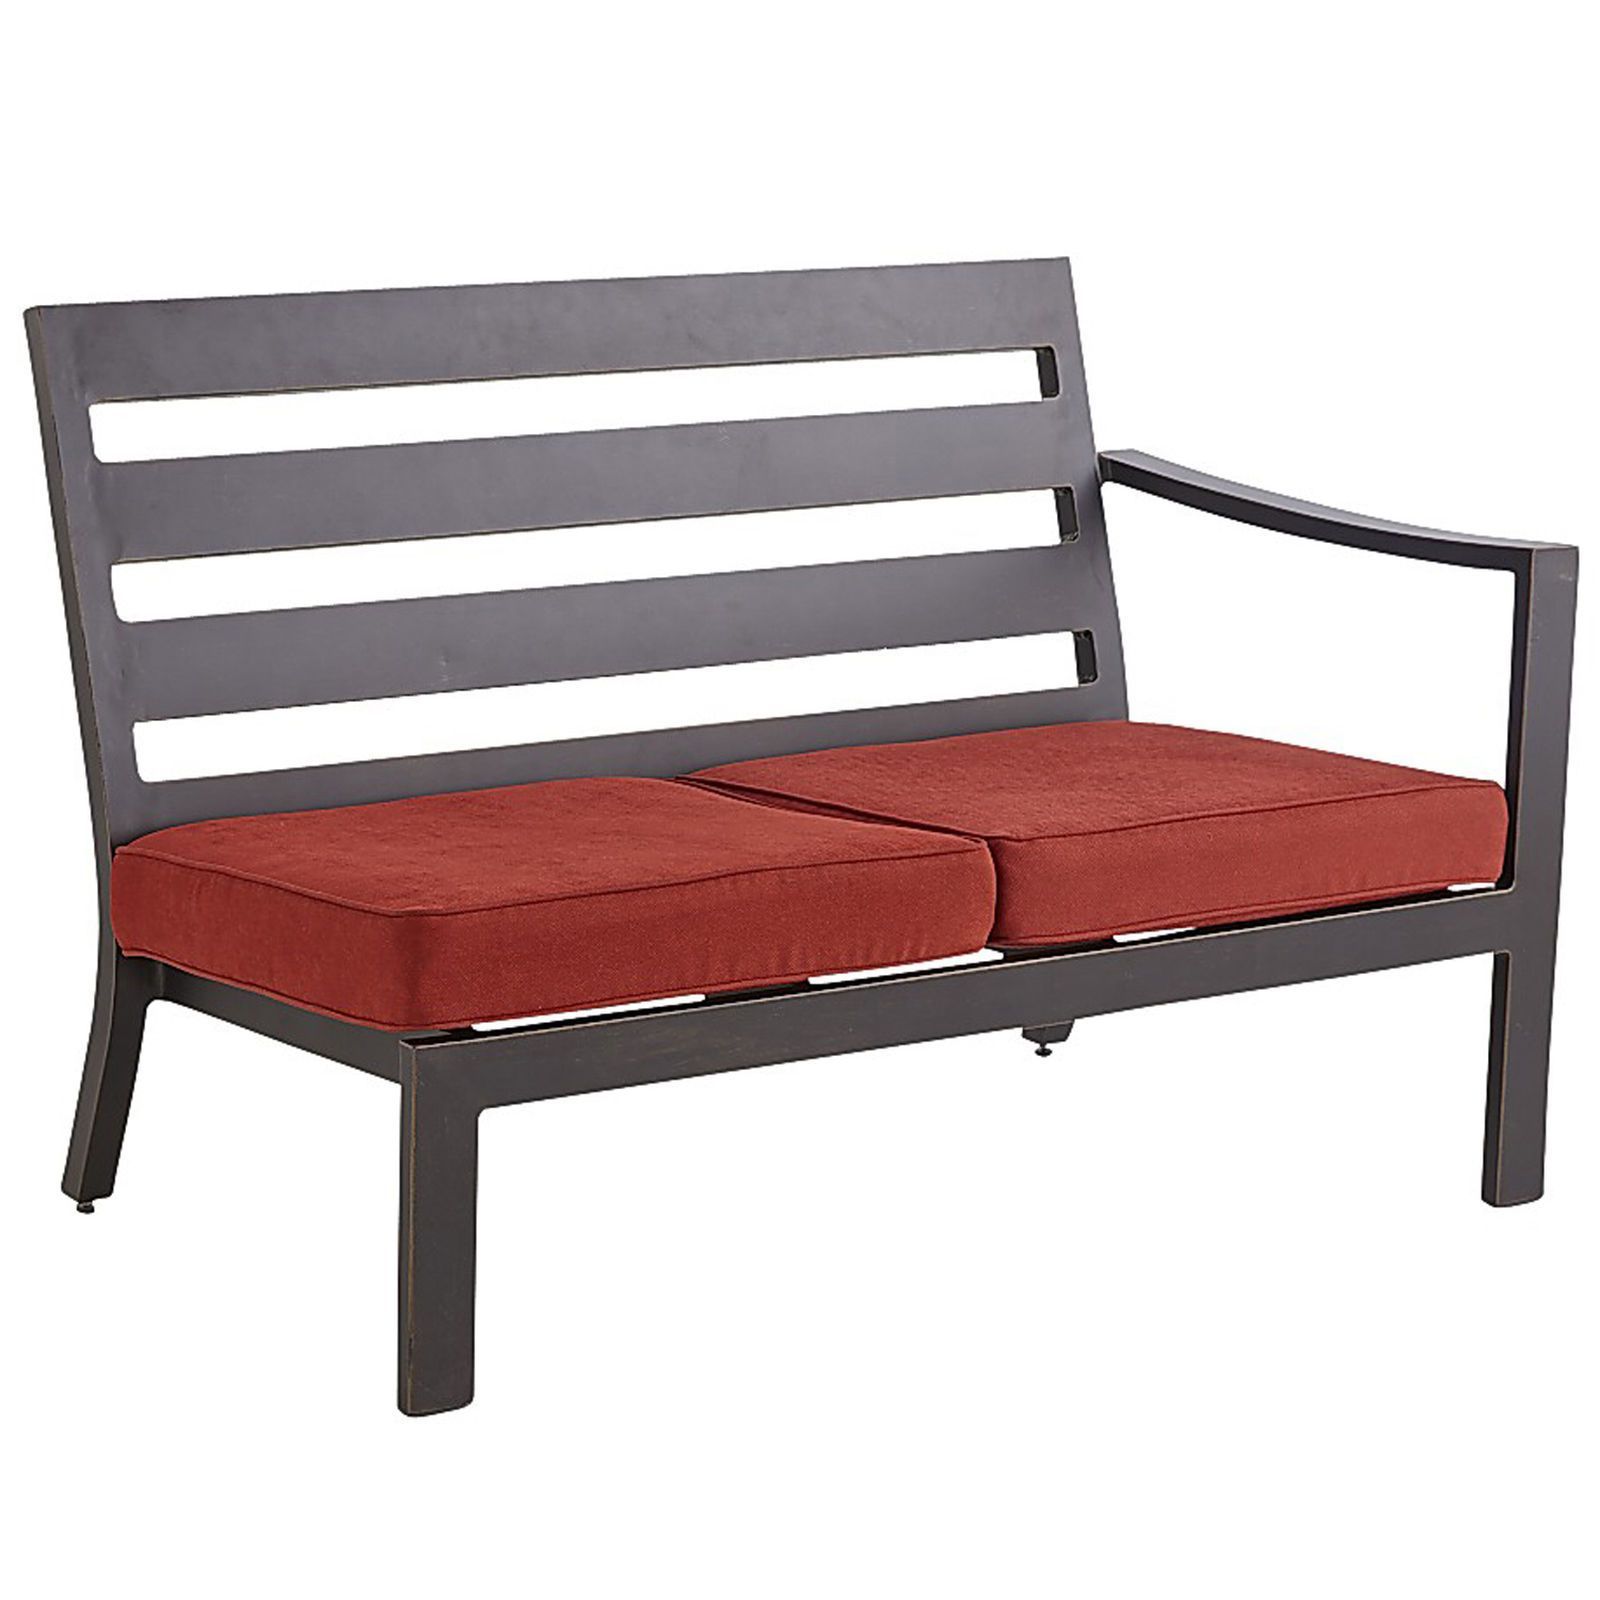 San Mateo Loveseat – Right Arm Facing | Pier 1 Imports | Outdoor Intended For Matteo Arm Sofa Chairs (View 19 of 20)